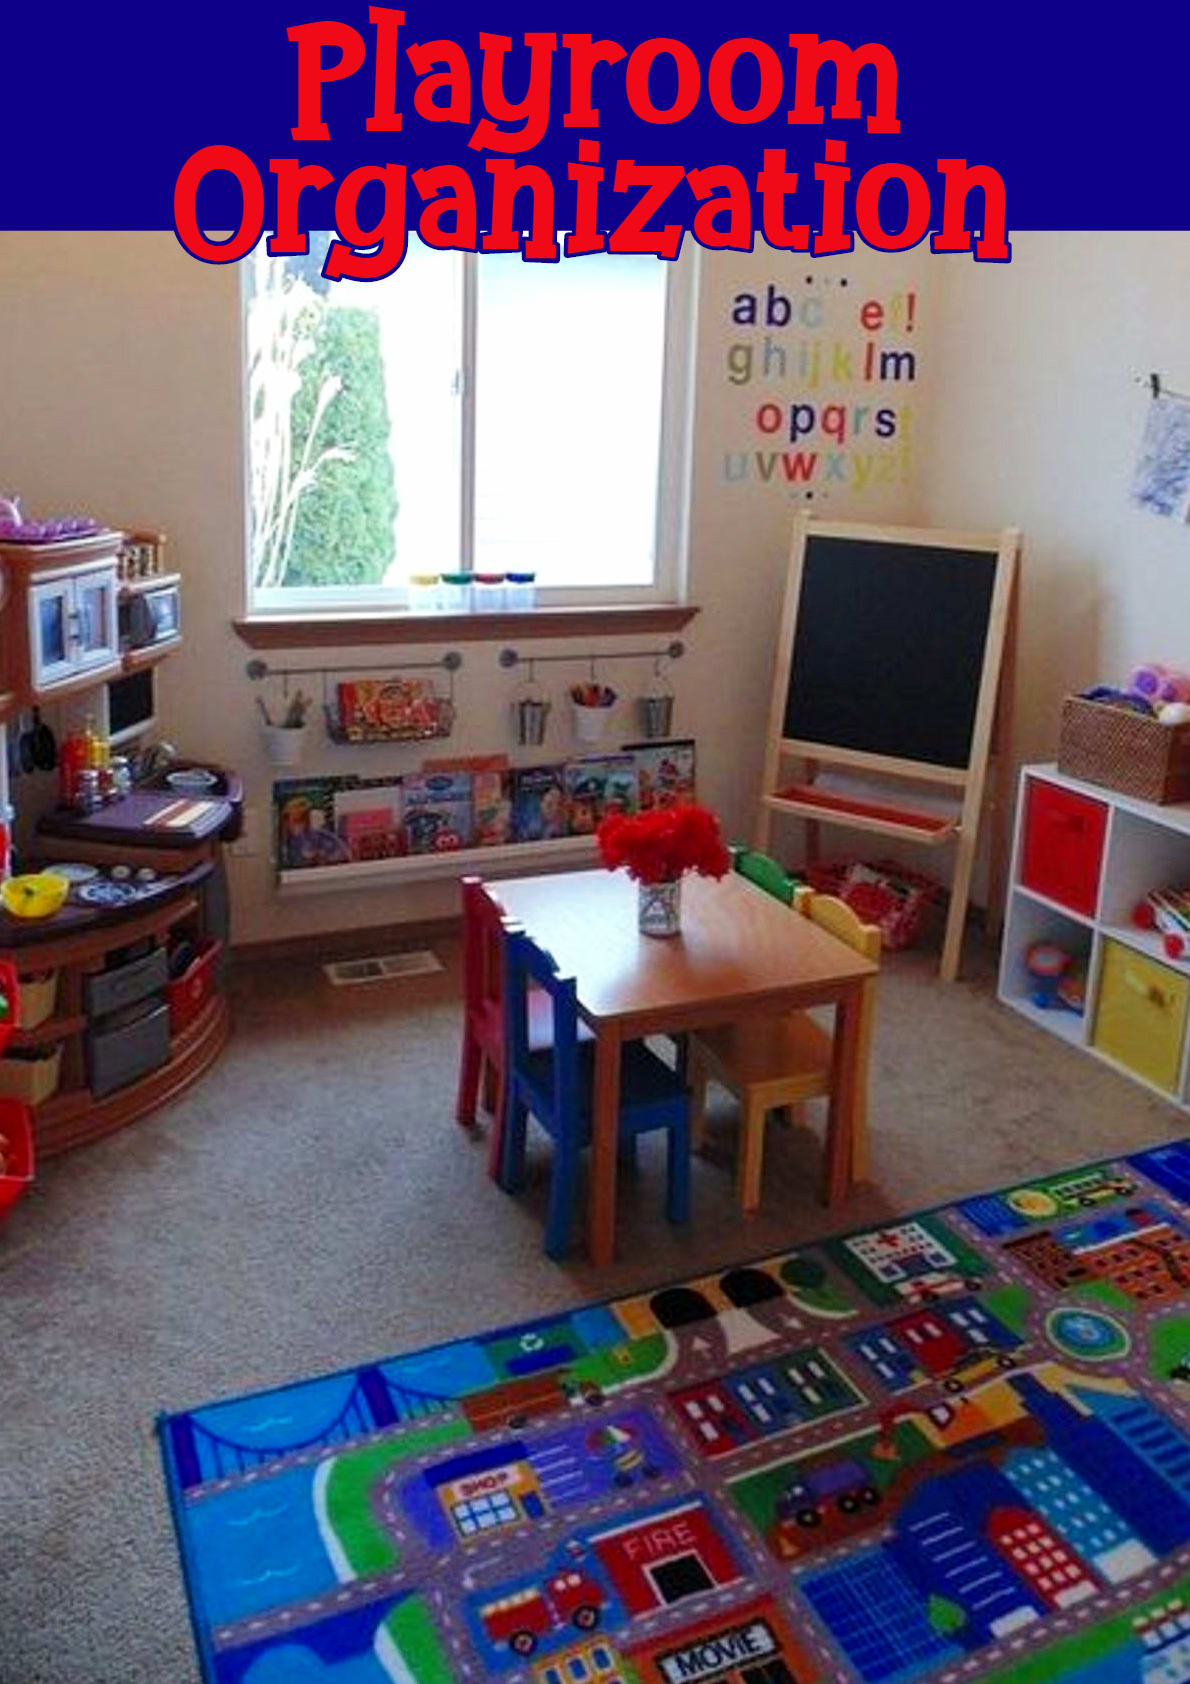 Playroom Organization Ideas - let's declutter and organize toys in the playroom, living room, bedroom, in your kids toy closet or their room even if you're on a budget with these cheap DIY Dollar Store toy storage ideas for small spaces. Organizing toys in kids rooms and other toys storage solutions for small spaces - organize kids toys, games, books, stuffed animals, action figures, hot wheels and legos with these home organization ideas and tips - this is how to organize toys and declutter toy clutter